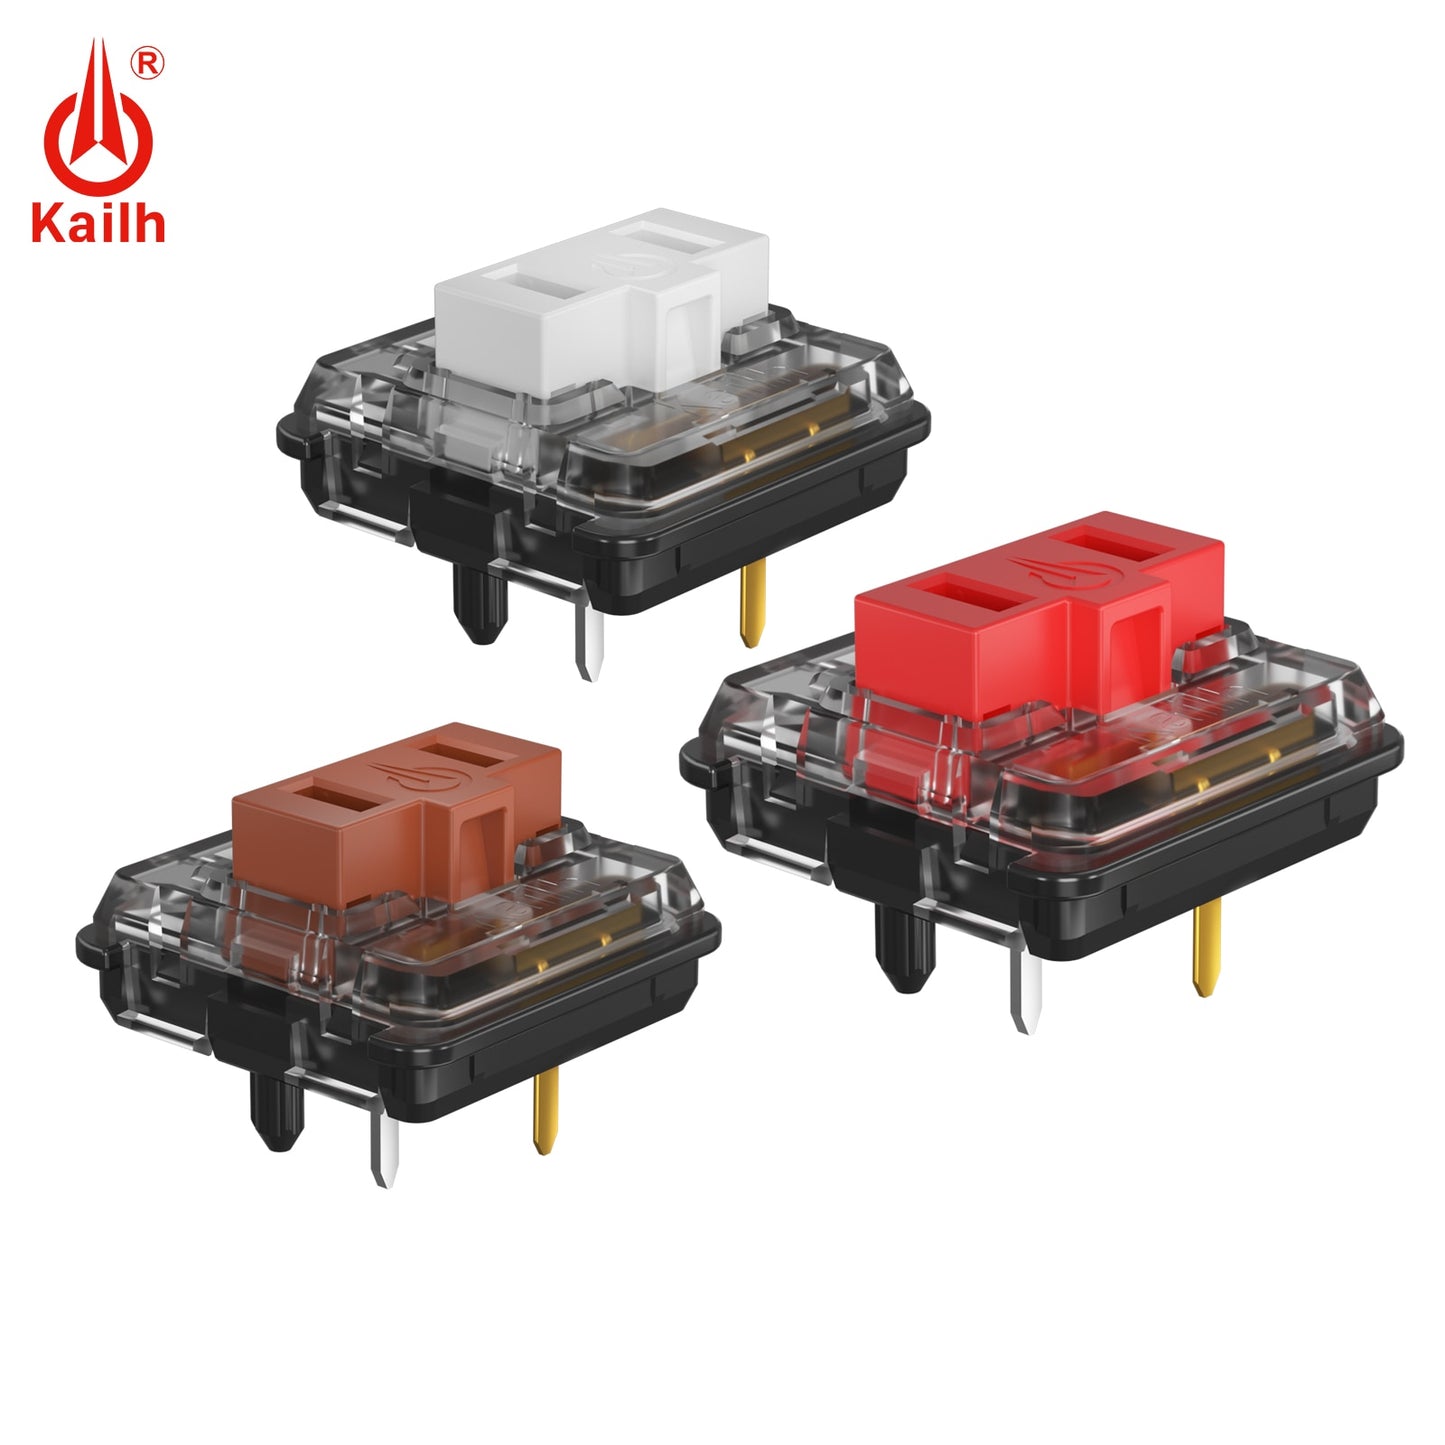 Kailh Choc Low Profile Switch 1350 Chocolate Keyboard Switch Clicky Tactile Linear White Switches Mechanical Keyboard for Laptop  Kailh   